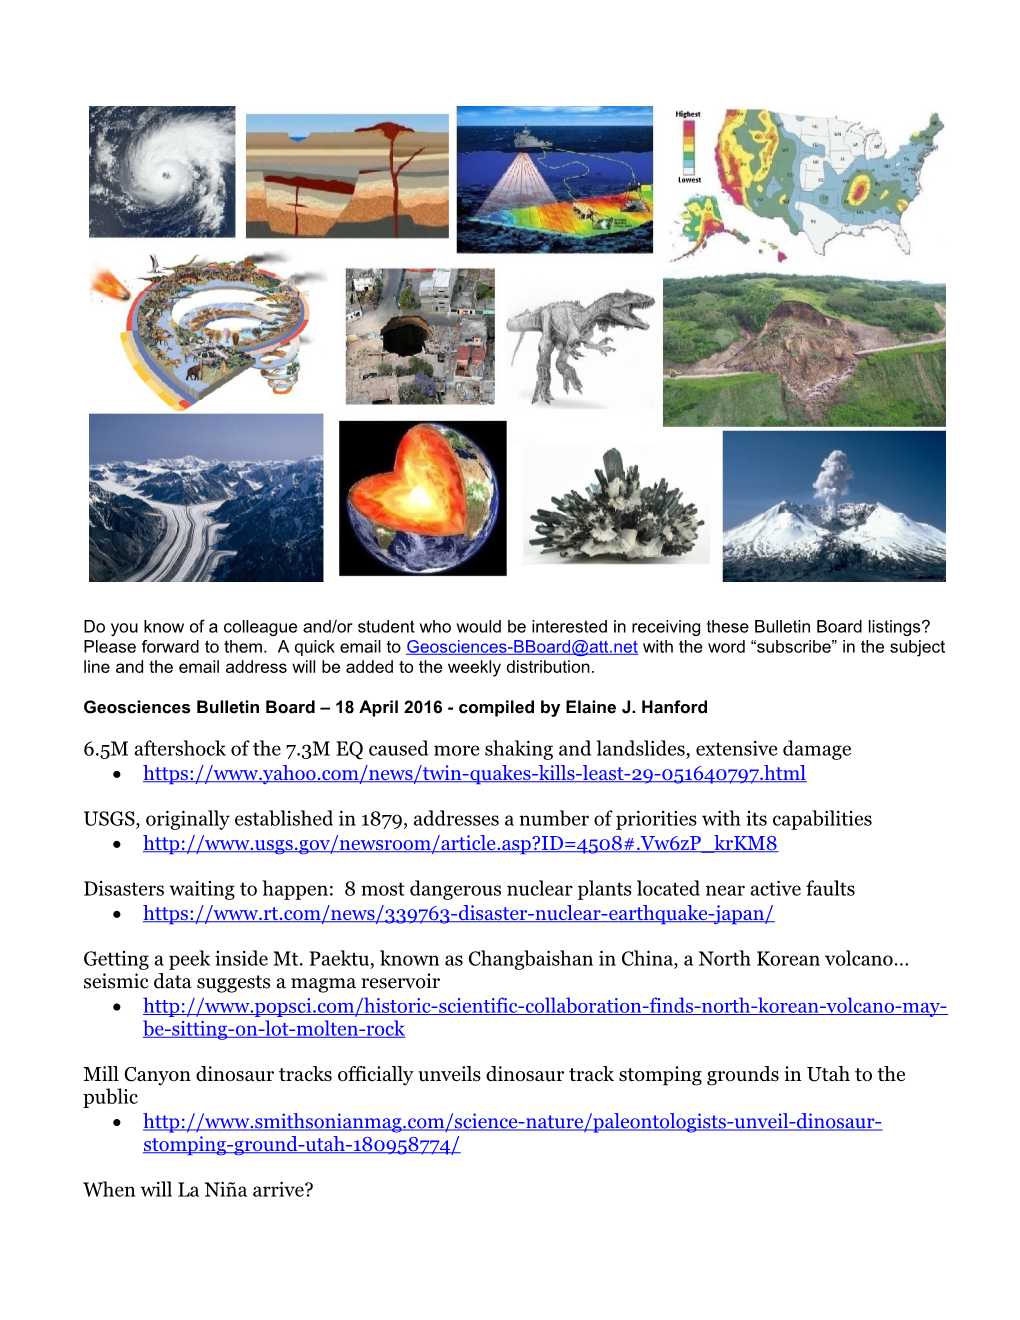 Geosciences Bulletin Board 18 April 2016- Compiled by Elaine J. Hanford